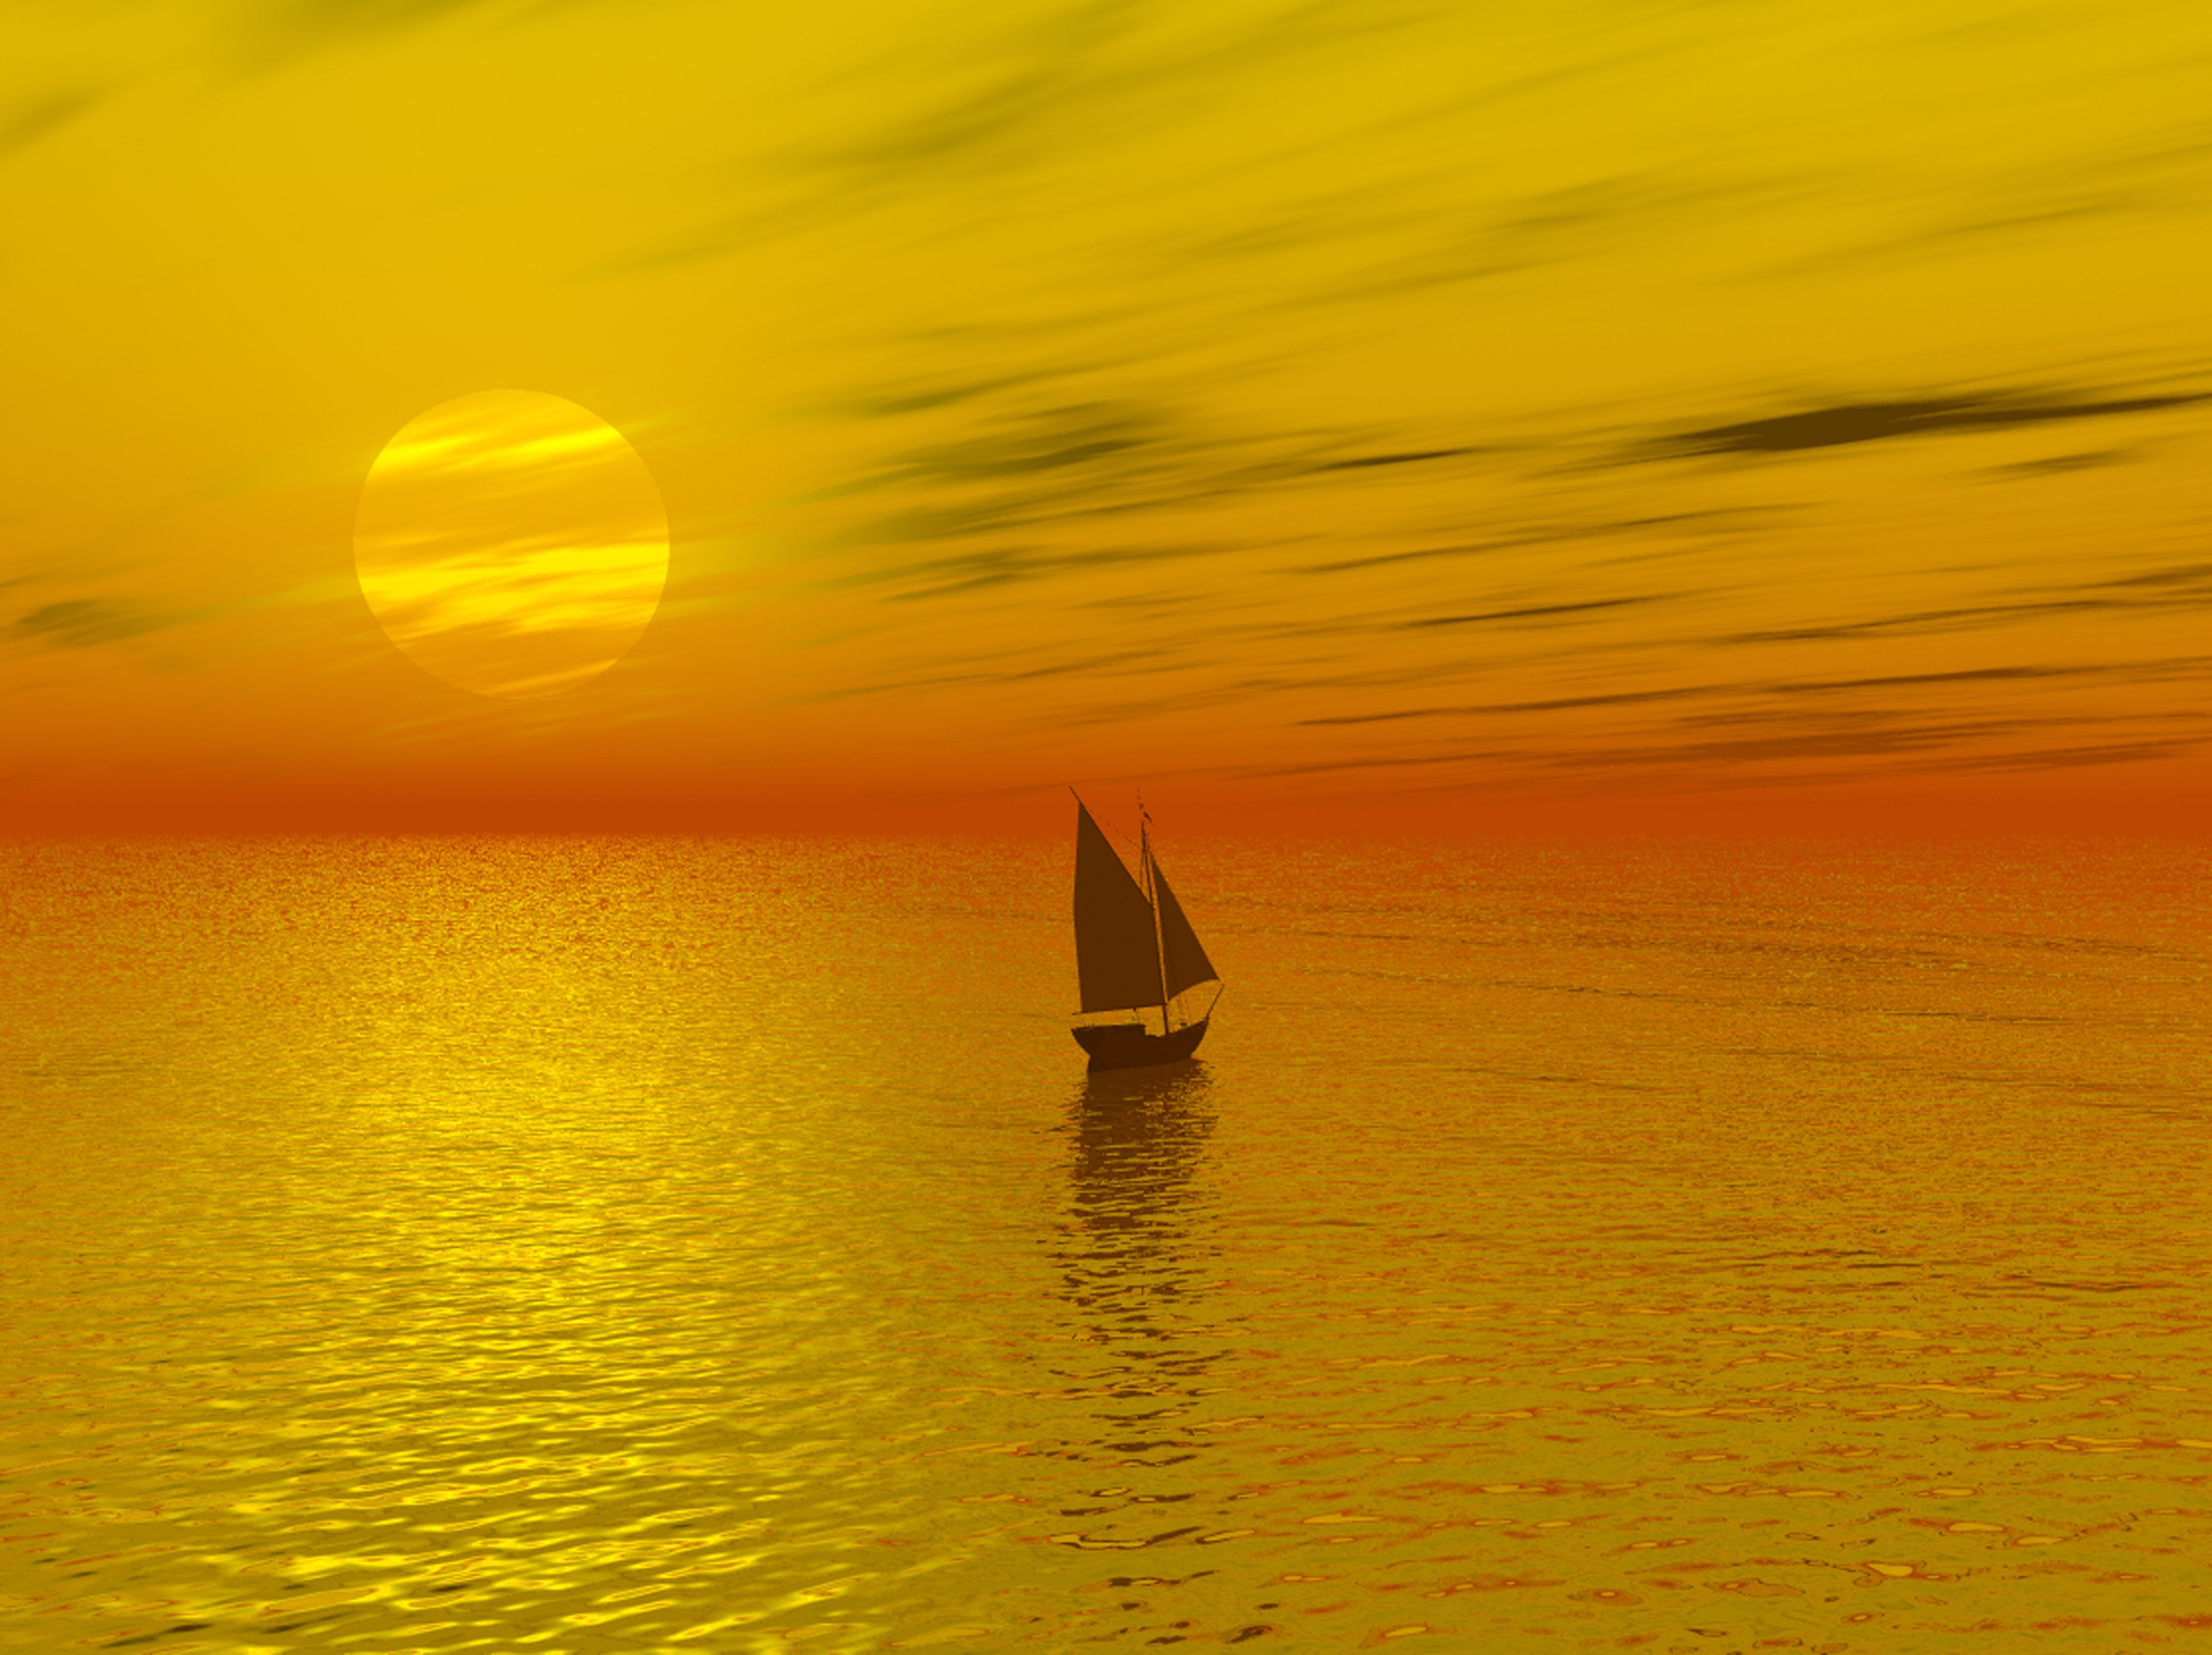 Sailboat crossing the sea during a sunset 4K UHD Wallpaper